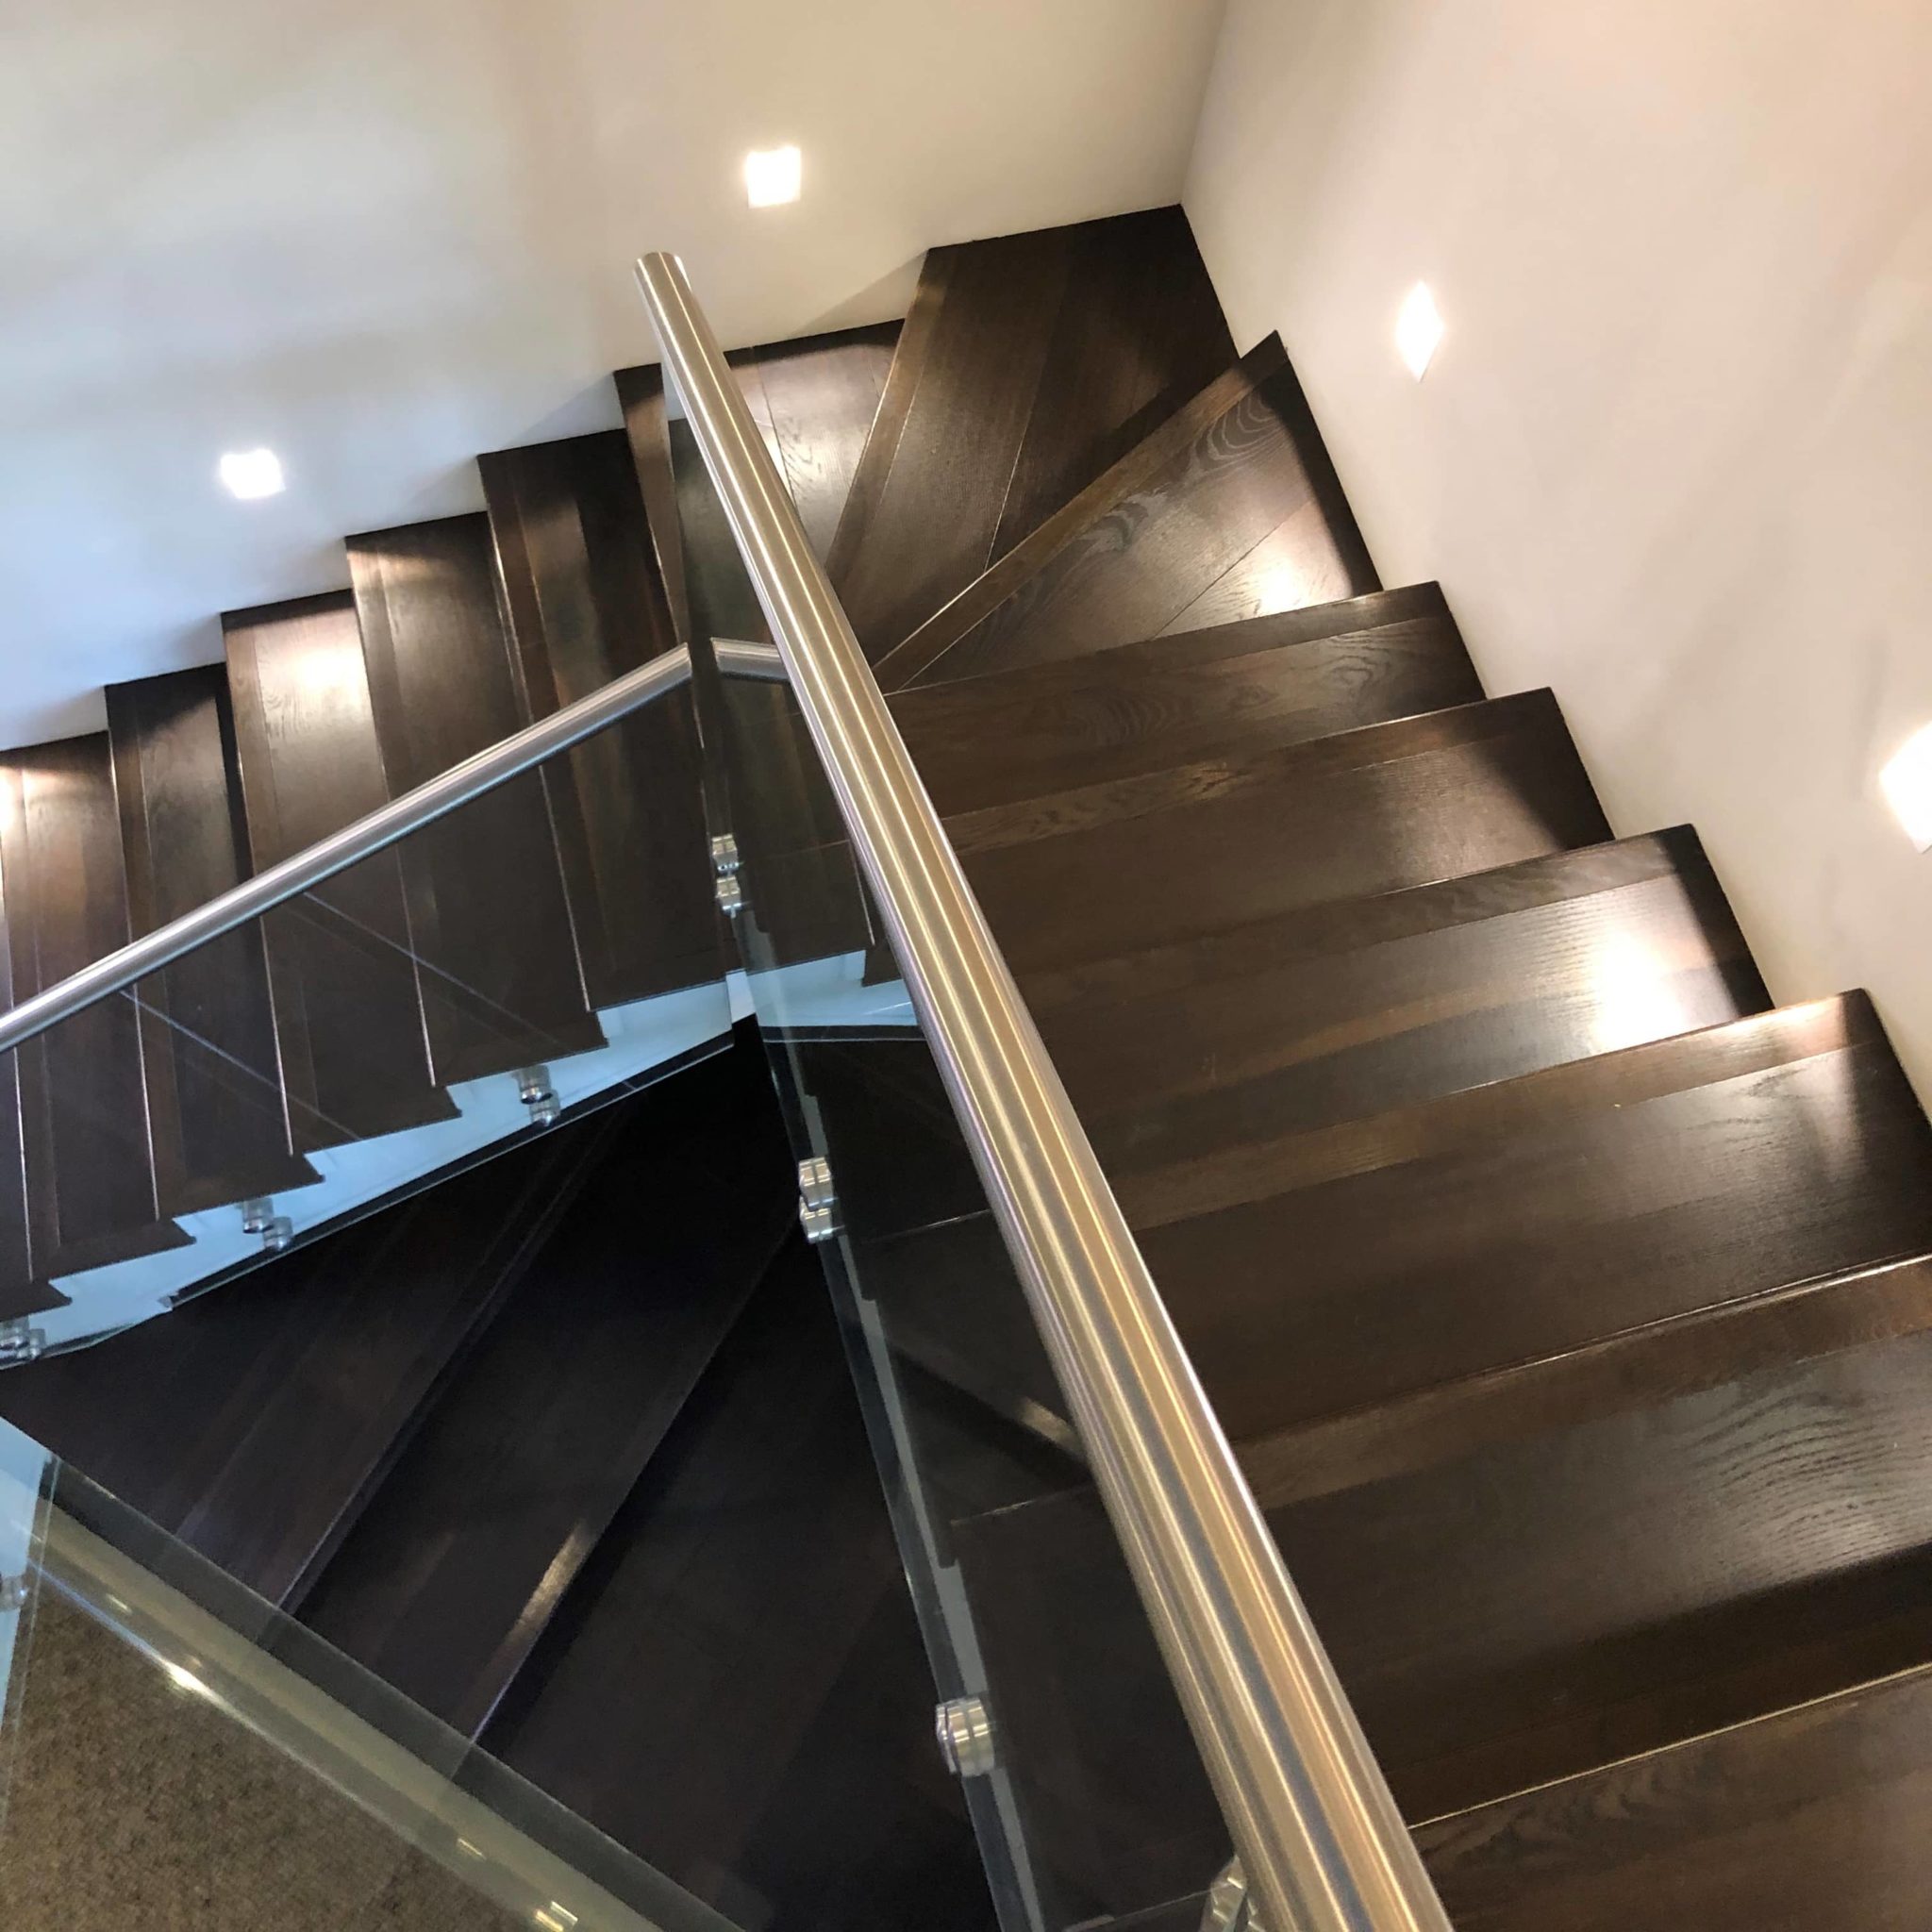 a set of stairs leading up to a second floor.